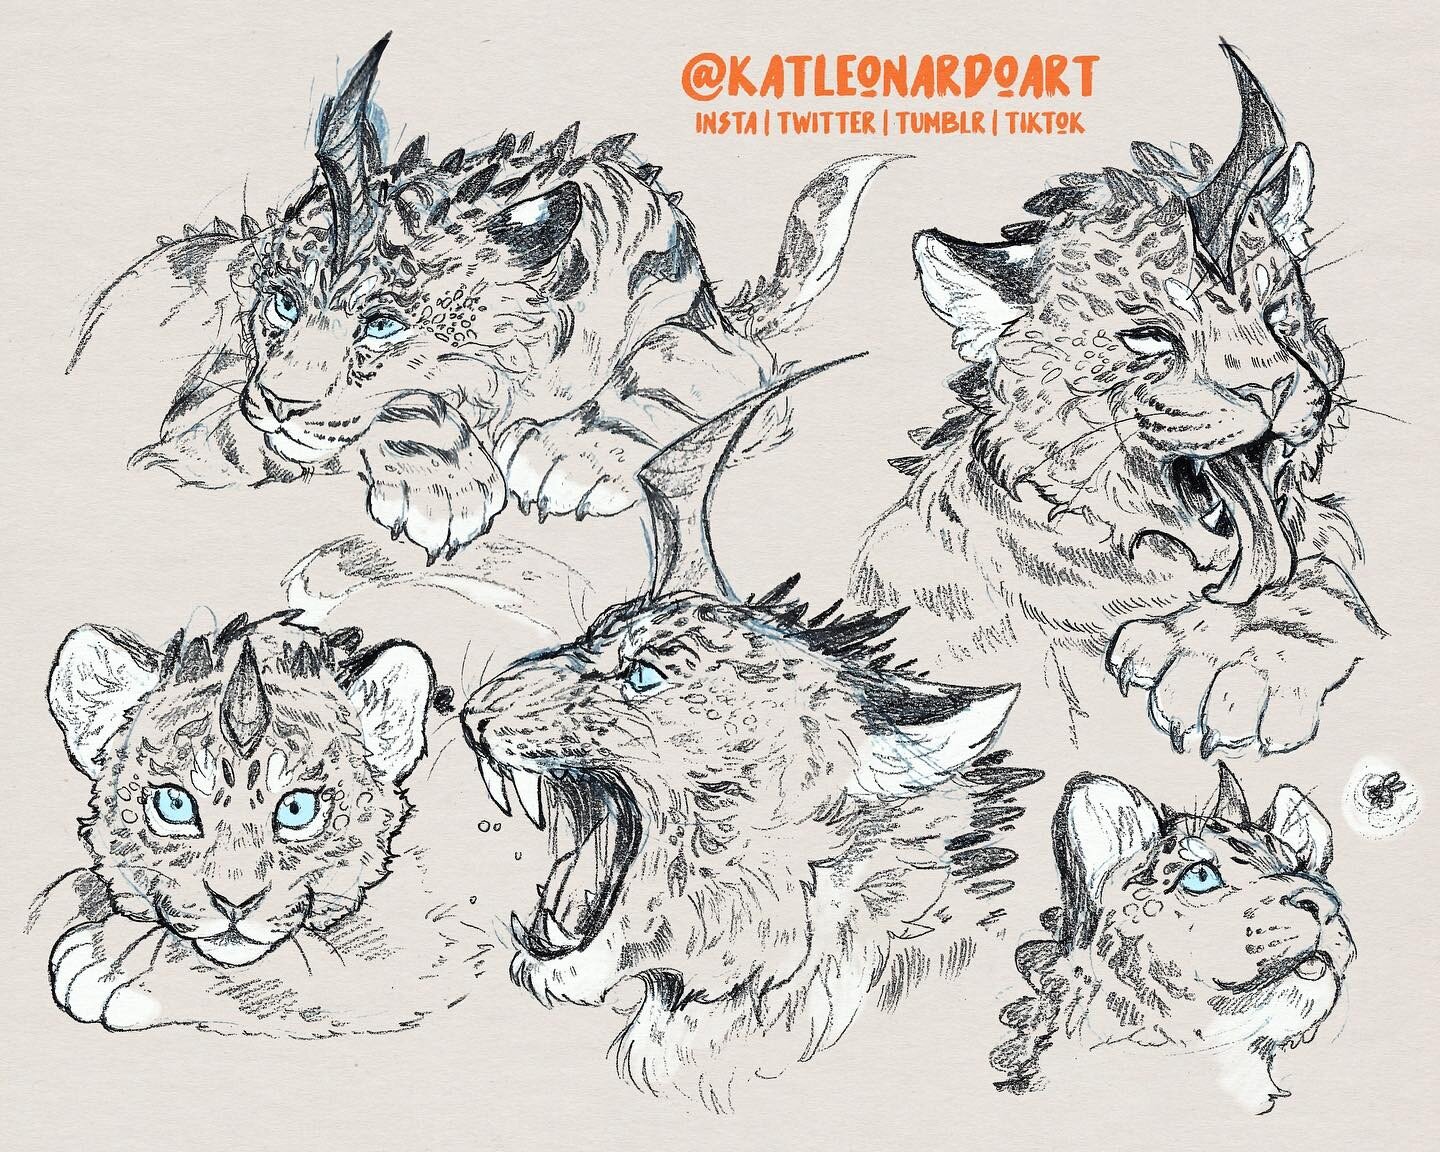 Some &ldquo;Horned Tiger&rdquo; sketches!!! 🐅🐅🐅I realized, rather painfully, that I don&rsquo;t have a lot of work geared towards character design and concept art specifically for my portfolio, so I want to change that! Starting with tigers 🐅✨ st